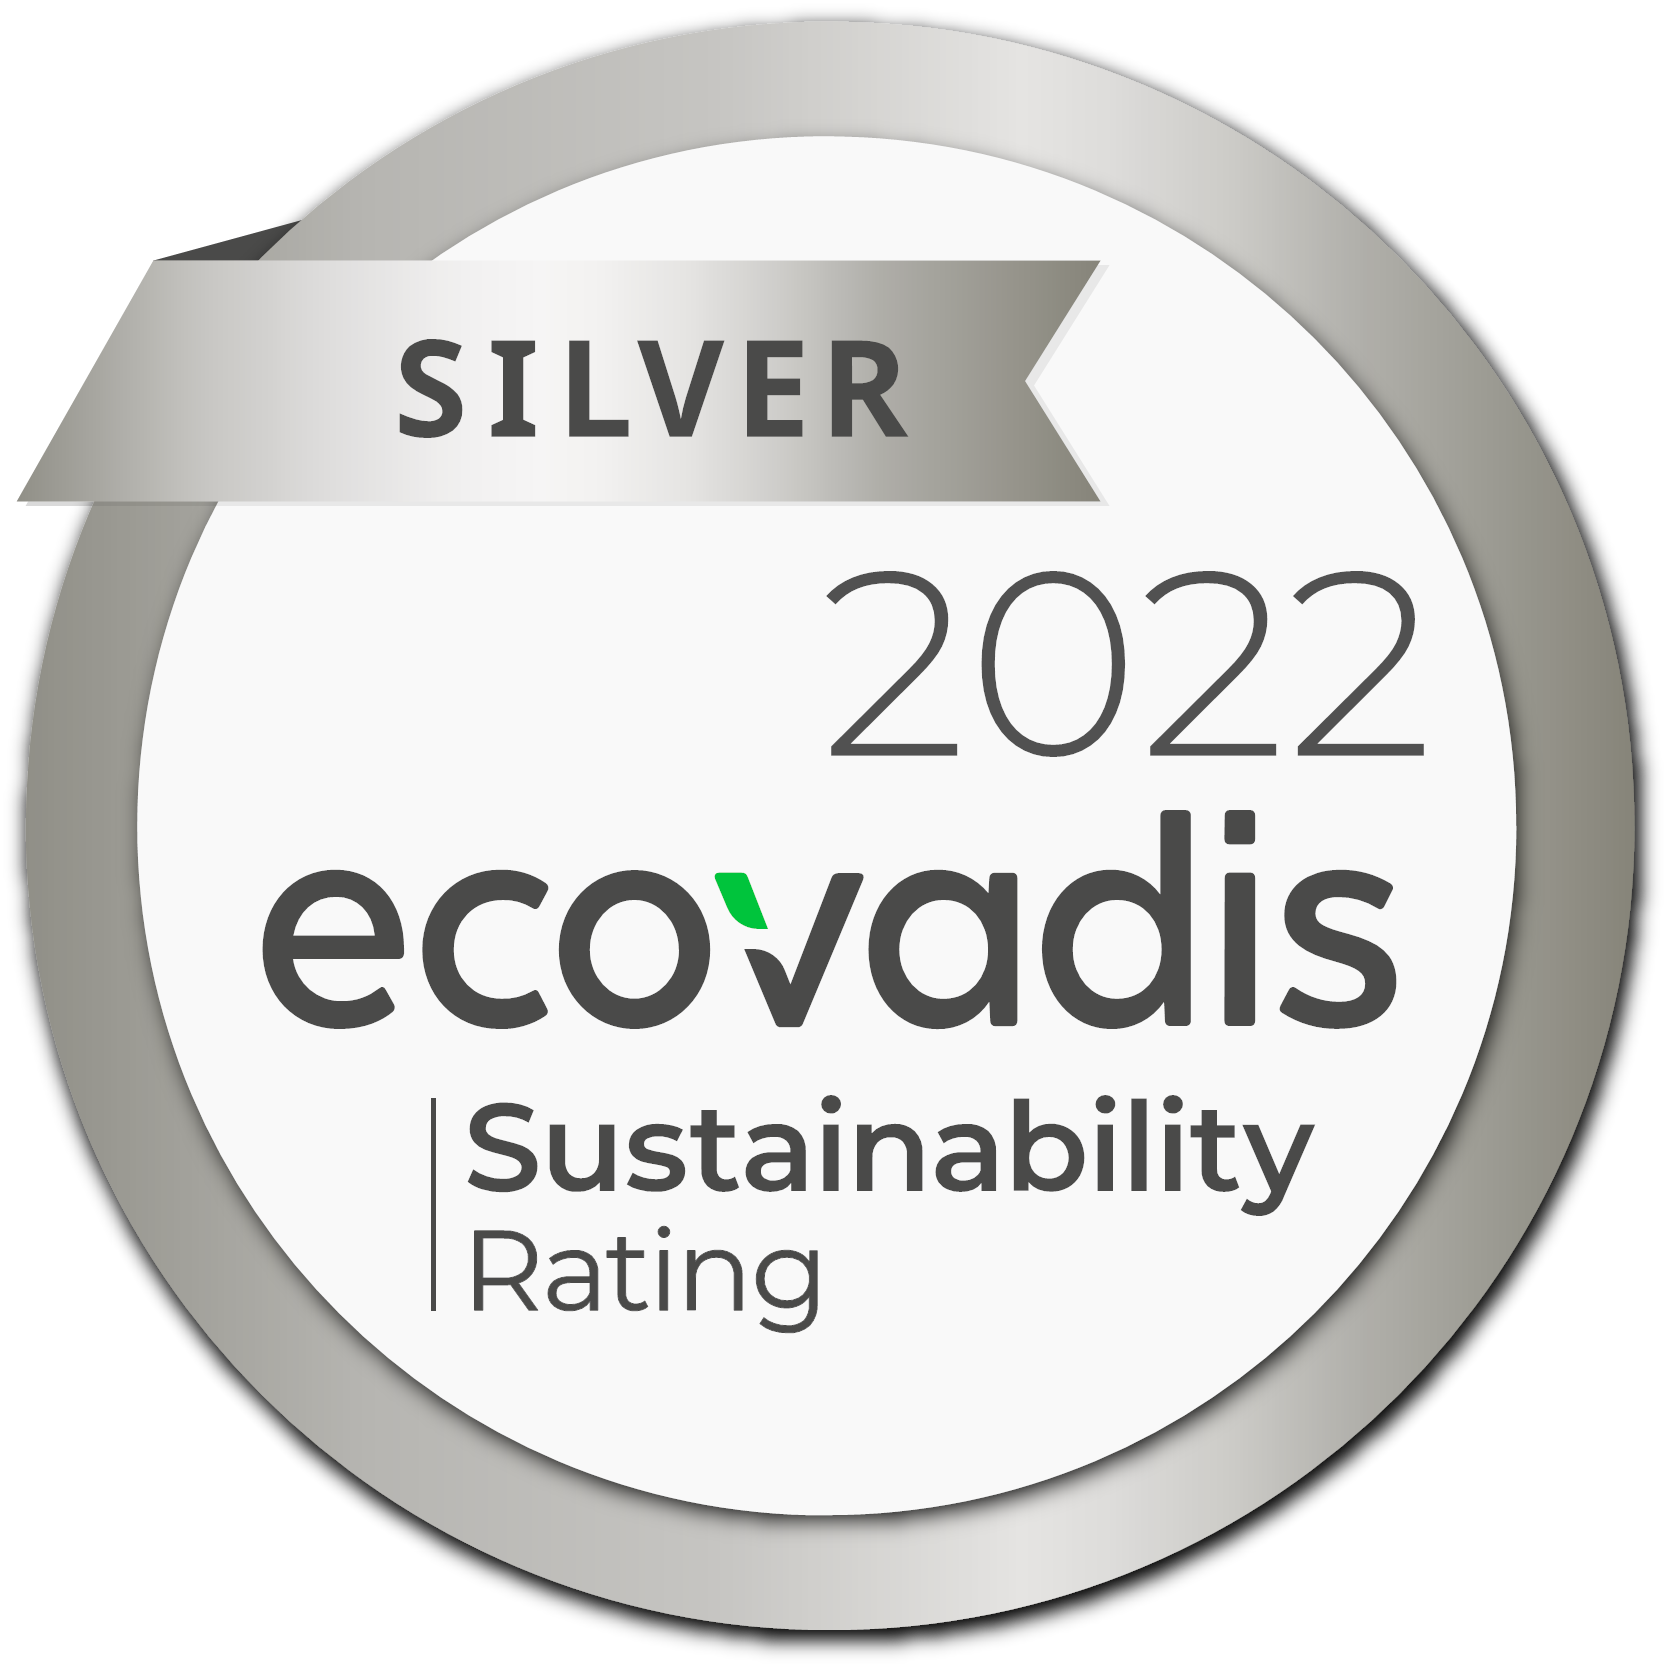 EcoVadis Silver Sustainability Rating for 2022